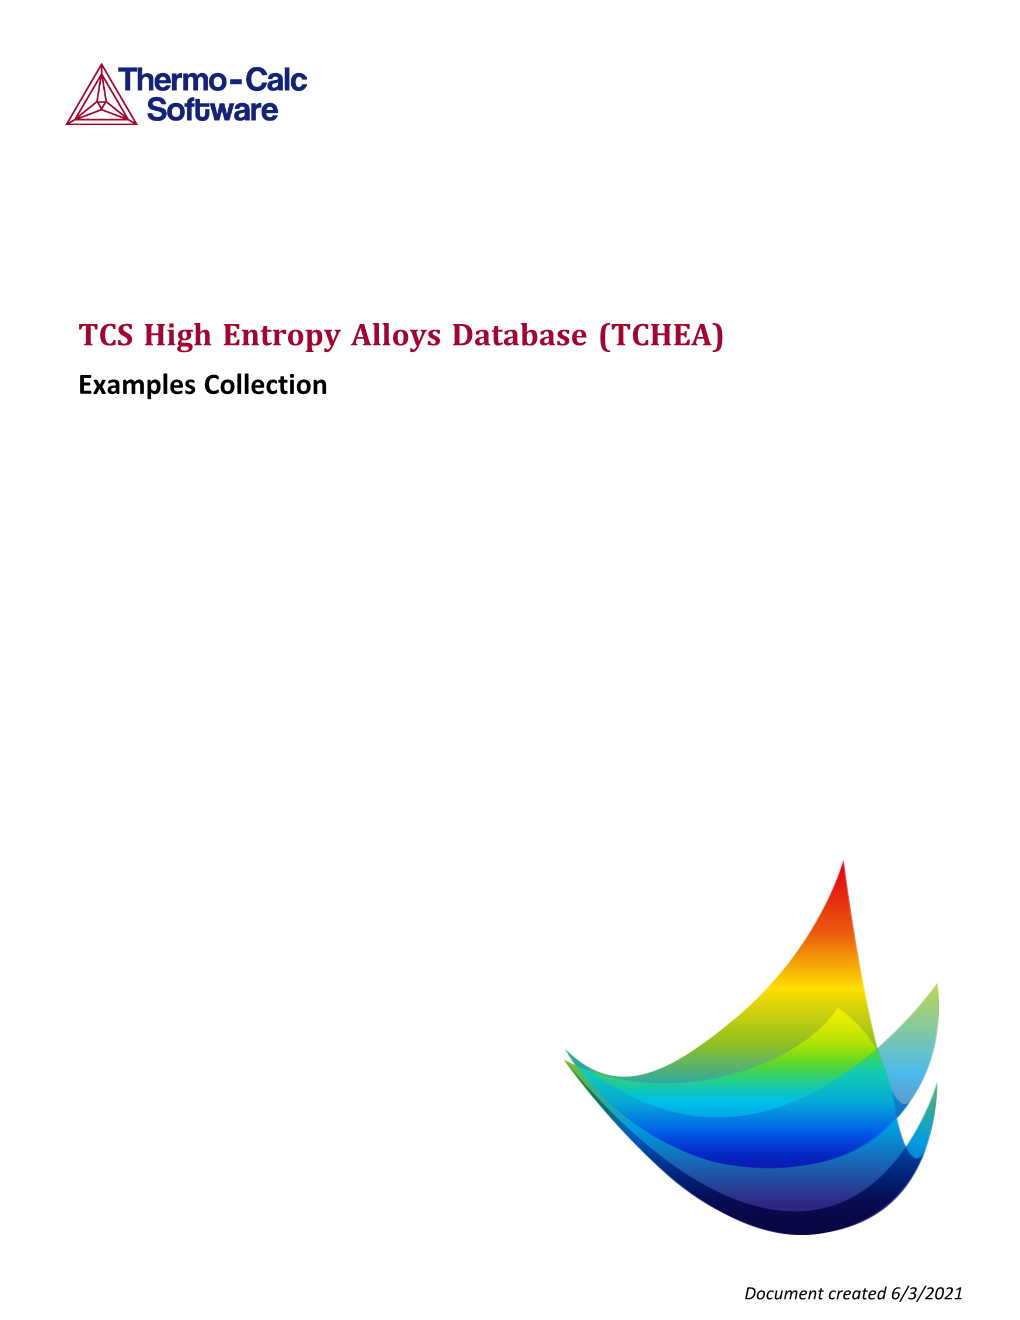 TCS High Entropy Alloys Database (TCHEA) Examples Collection